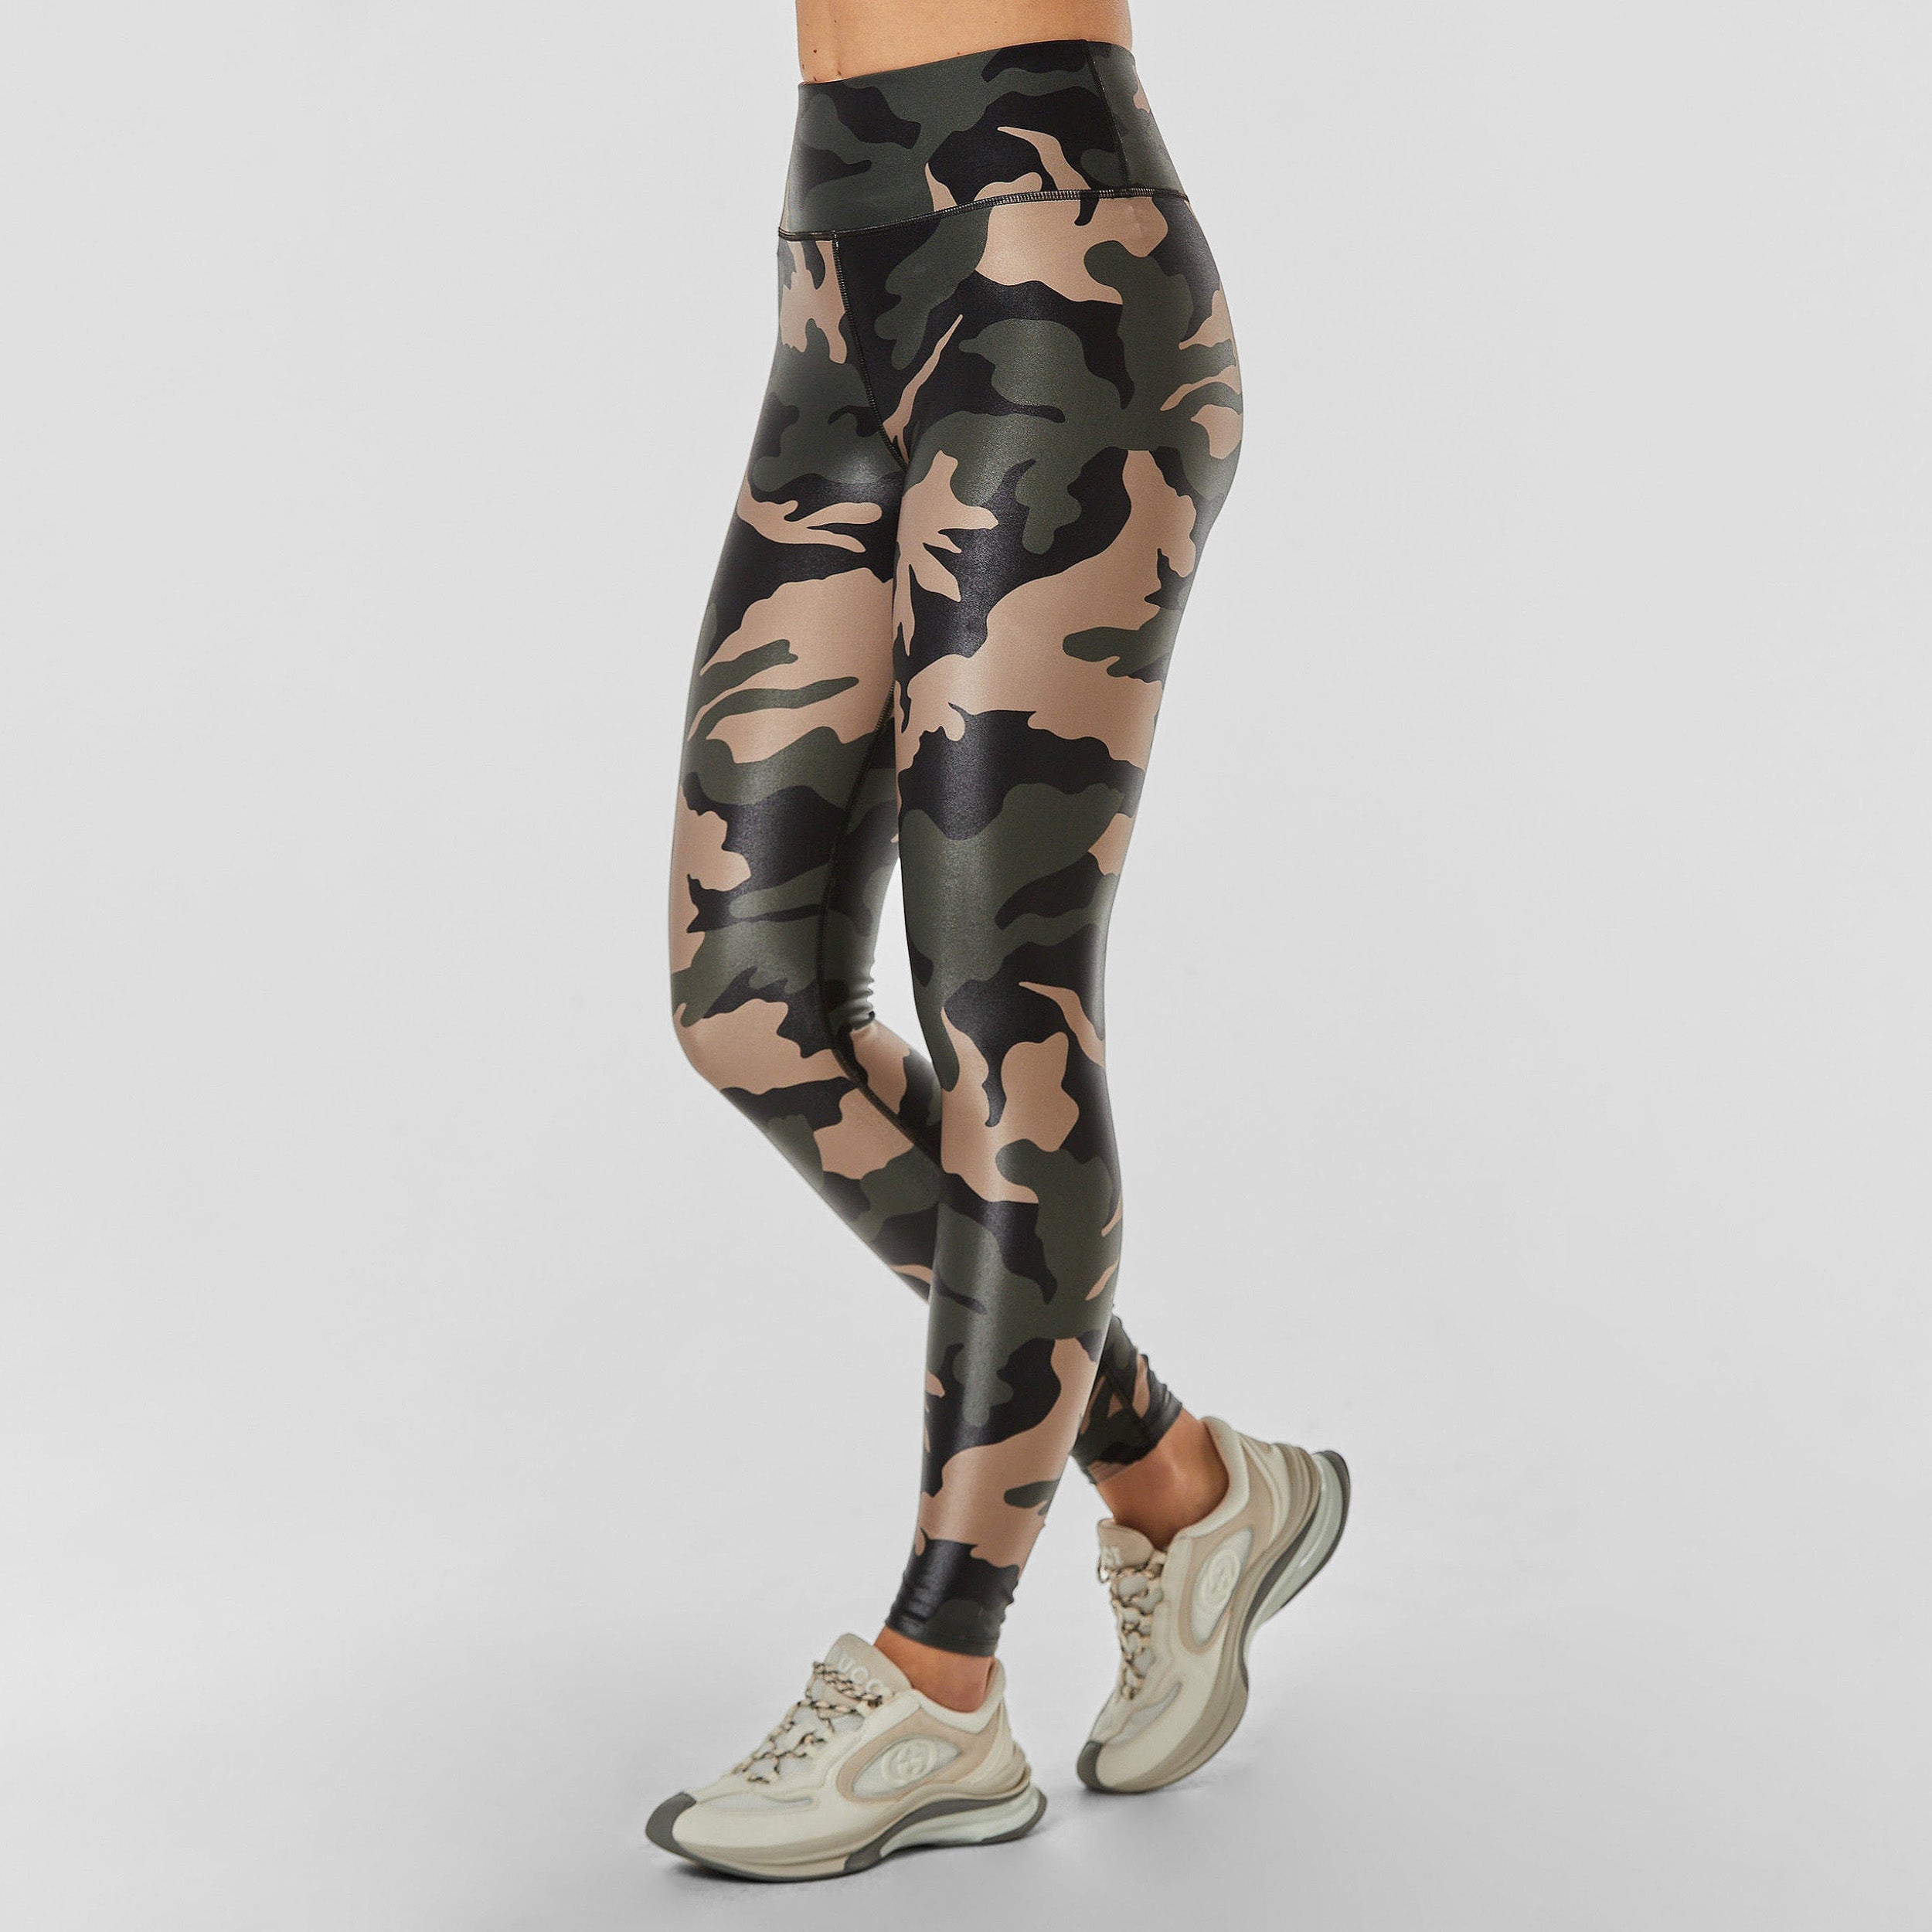 Side view of woman wearing lightweight, lustrous shine, quick drying camo printed liquid leggings